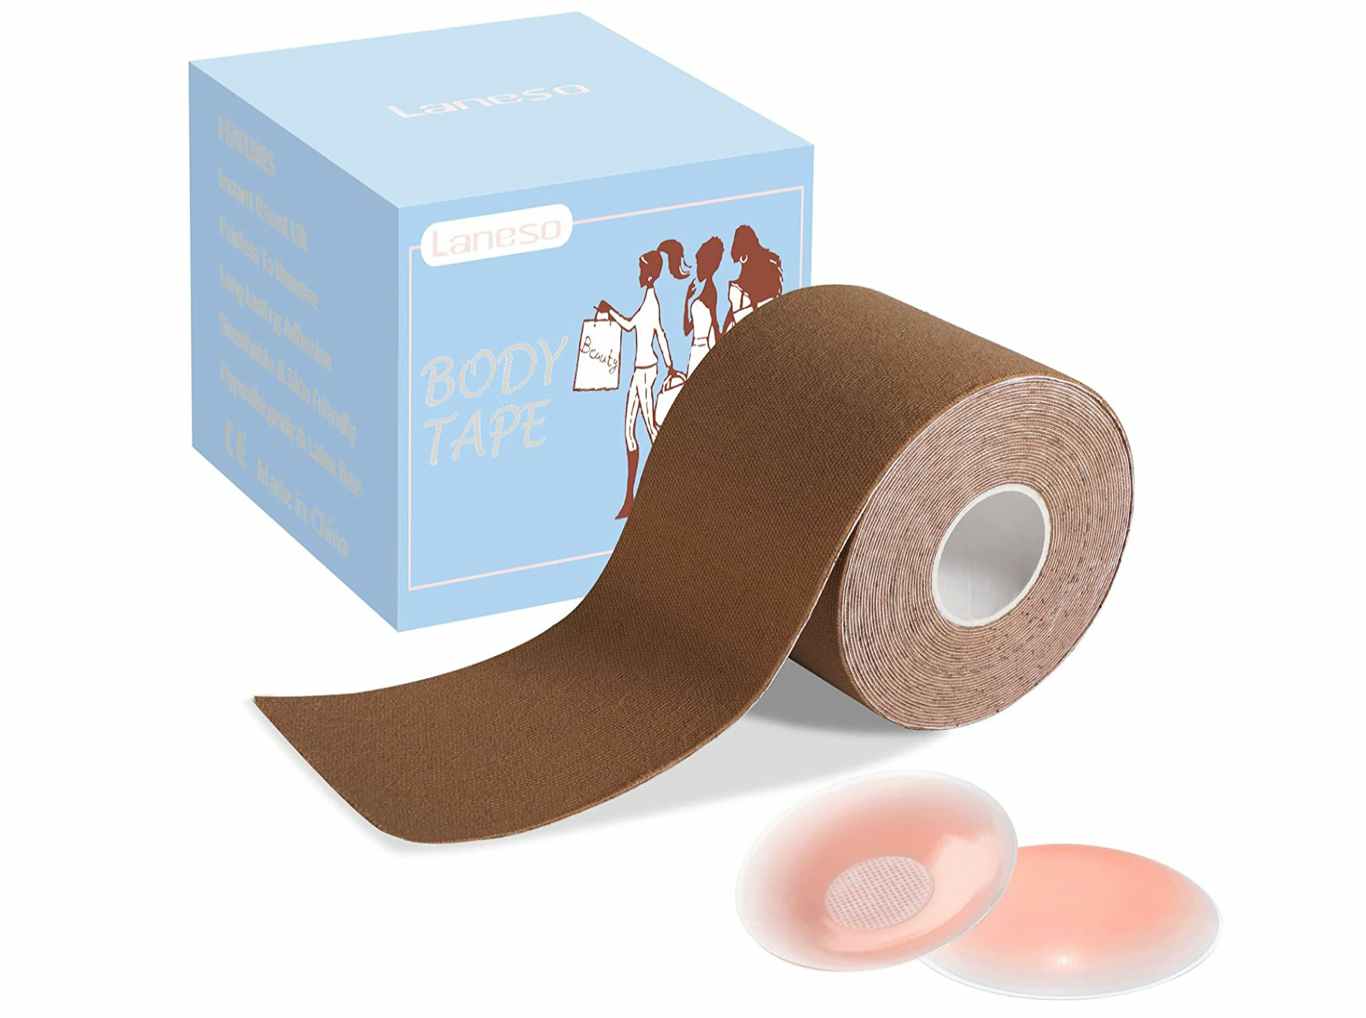 Boob tape roll and nipple covers on a white background